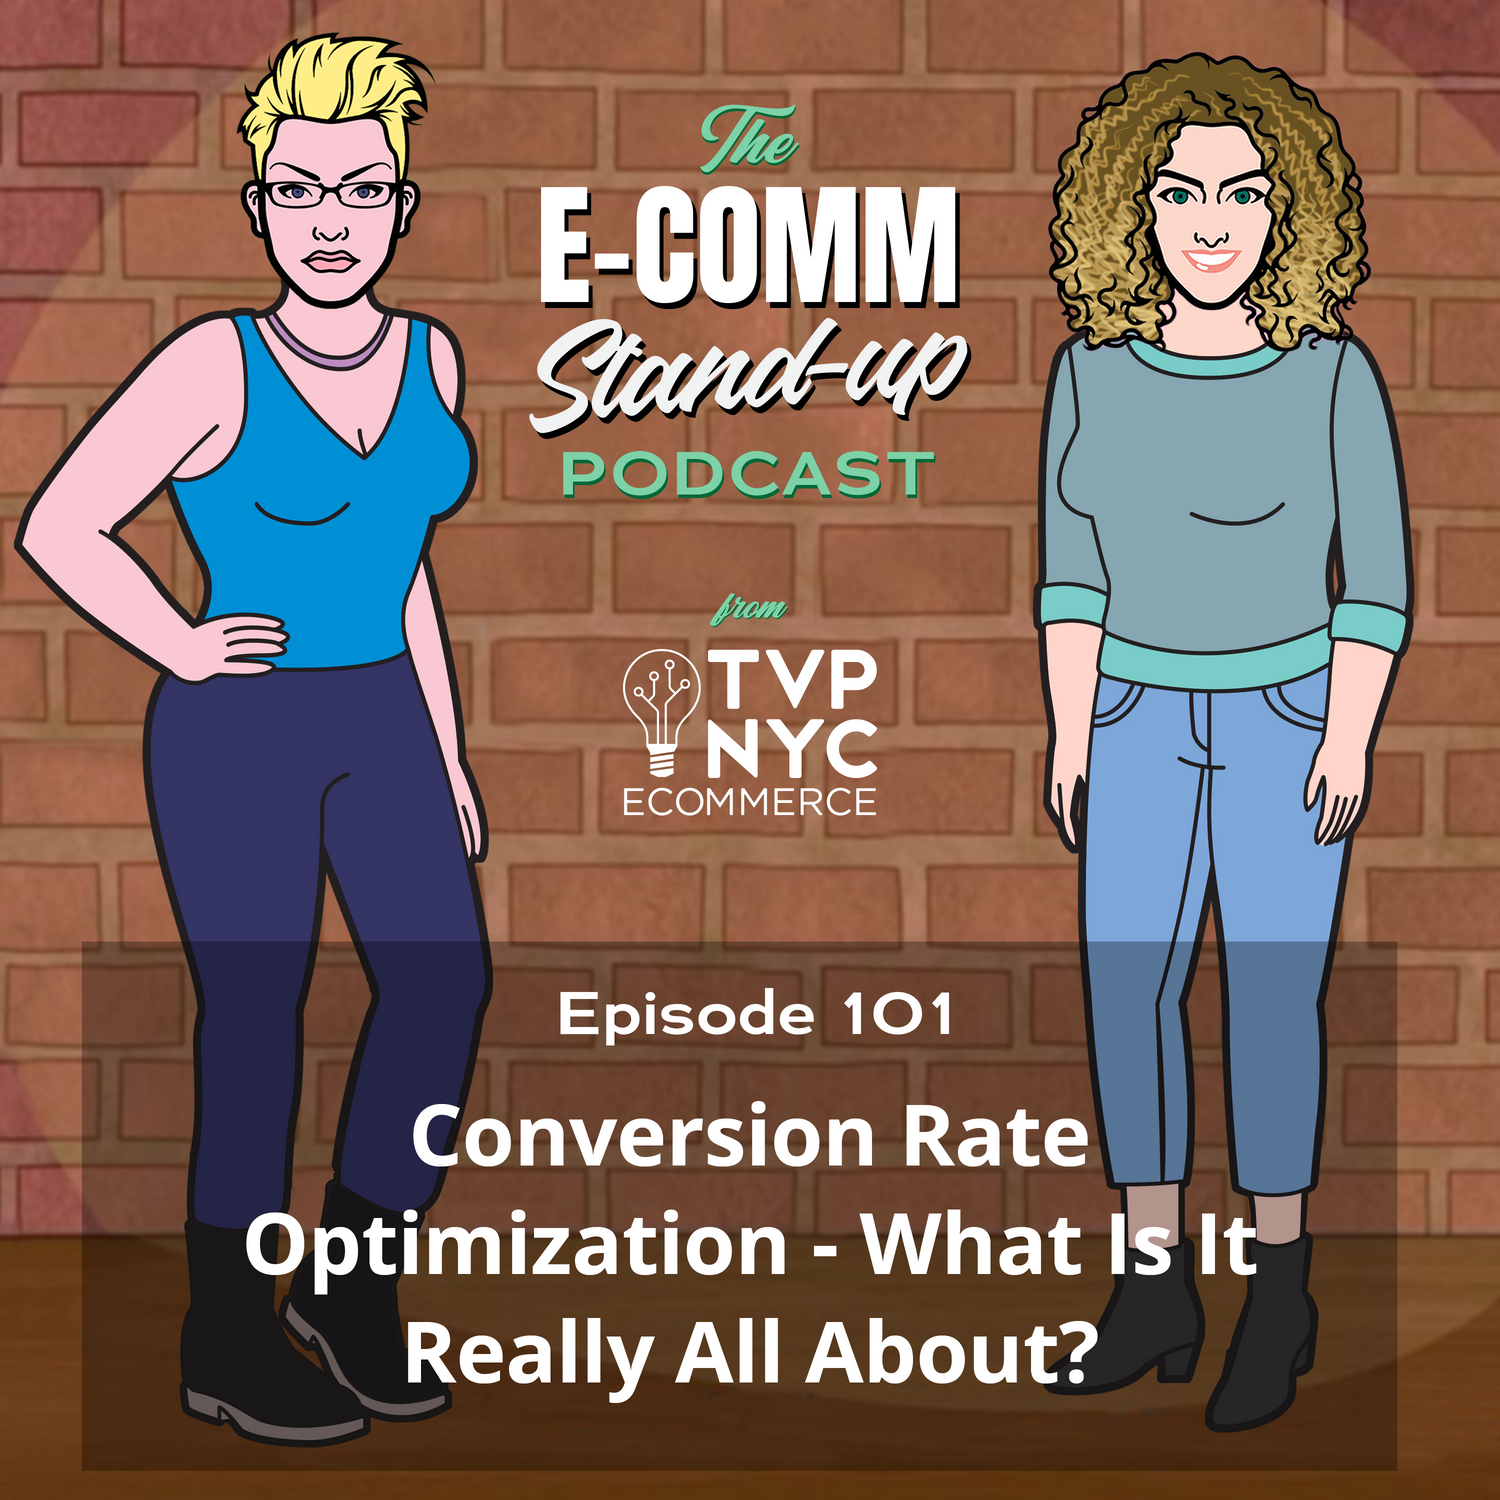 Conversion Rate Optimization - What Is It Really All About?